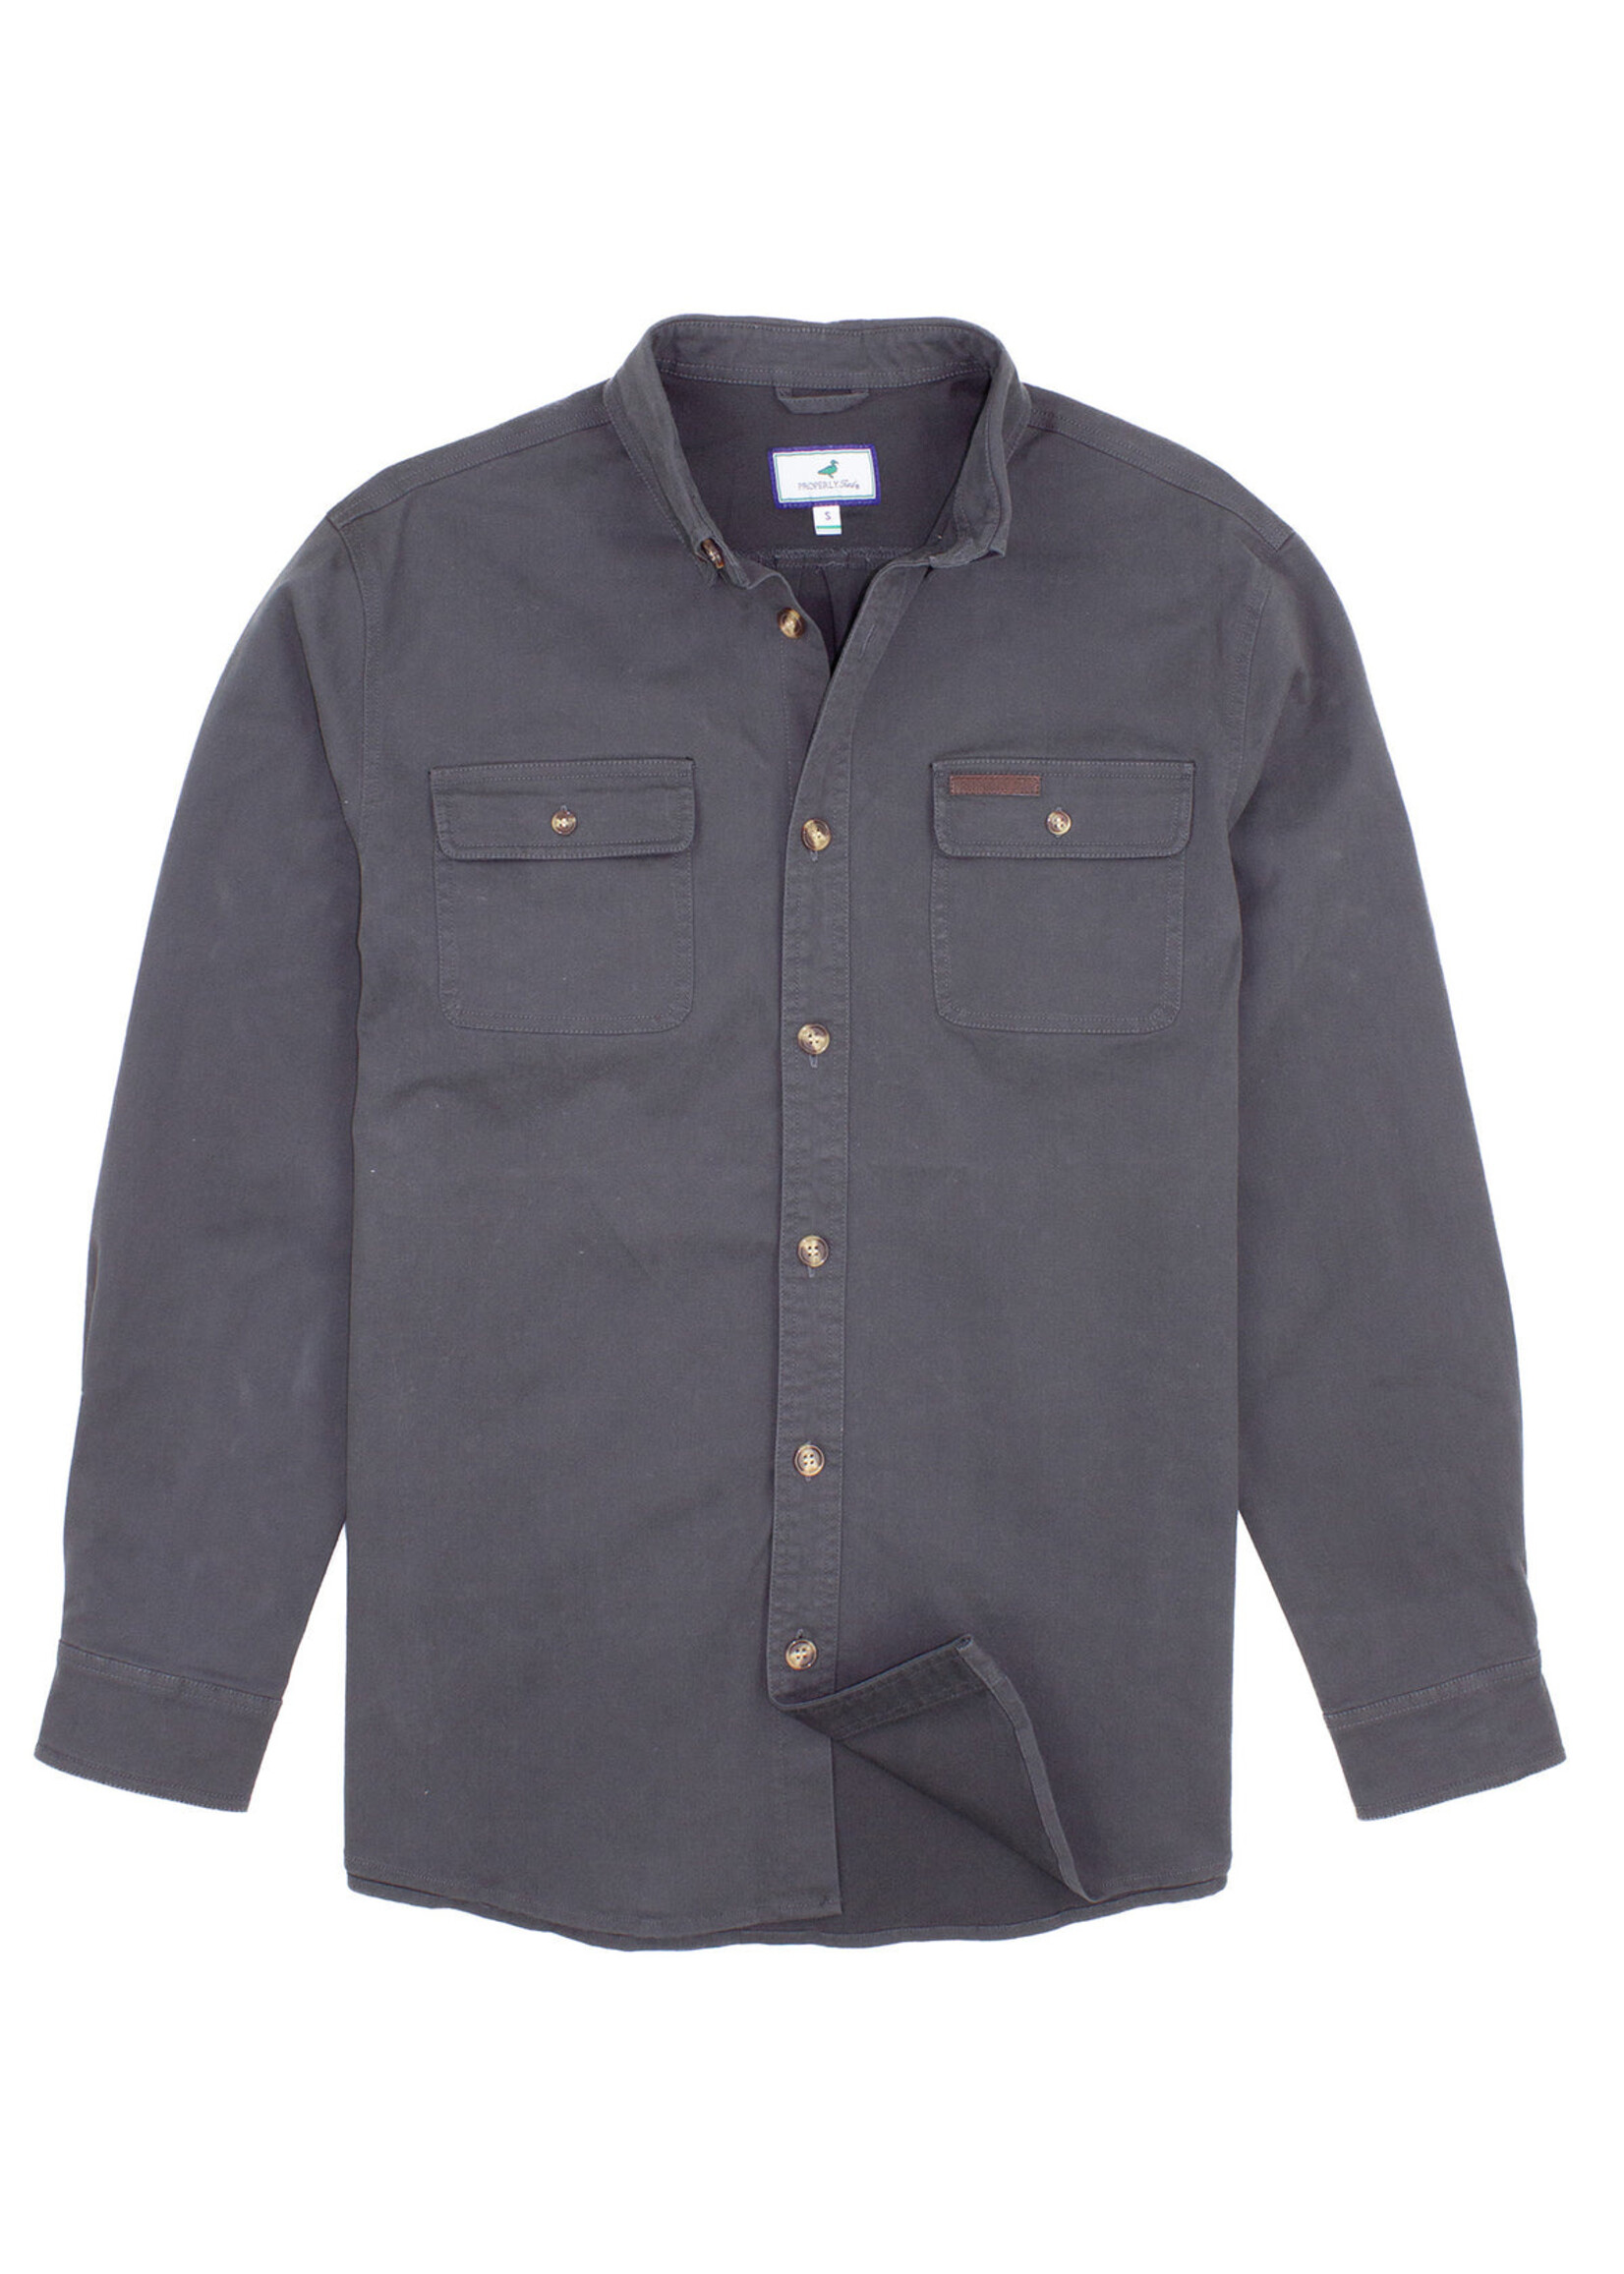 Properly Tied Harvest Work Shirt Charcoal